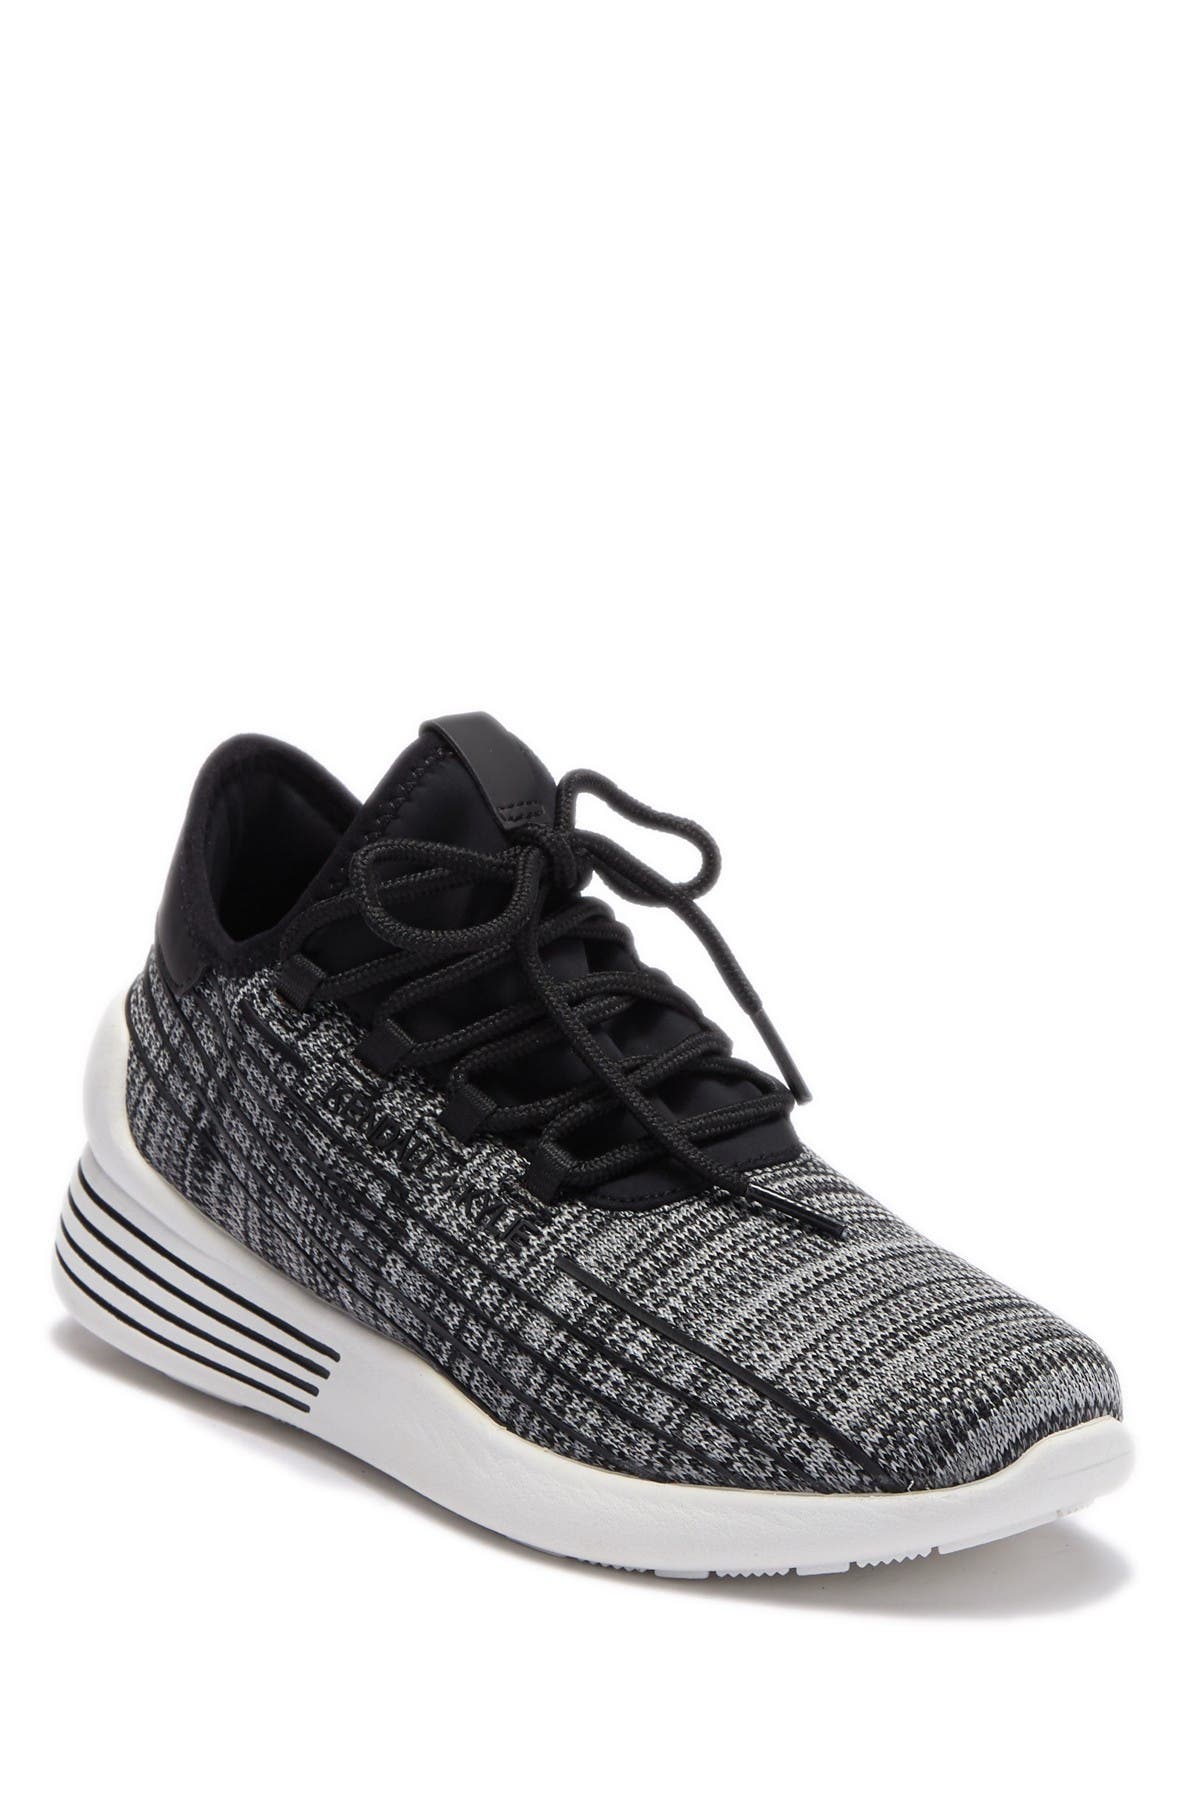 KENDALL AND KYLIE | Dreeze Knit Sneaker 